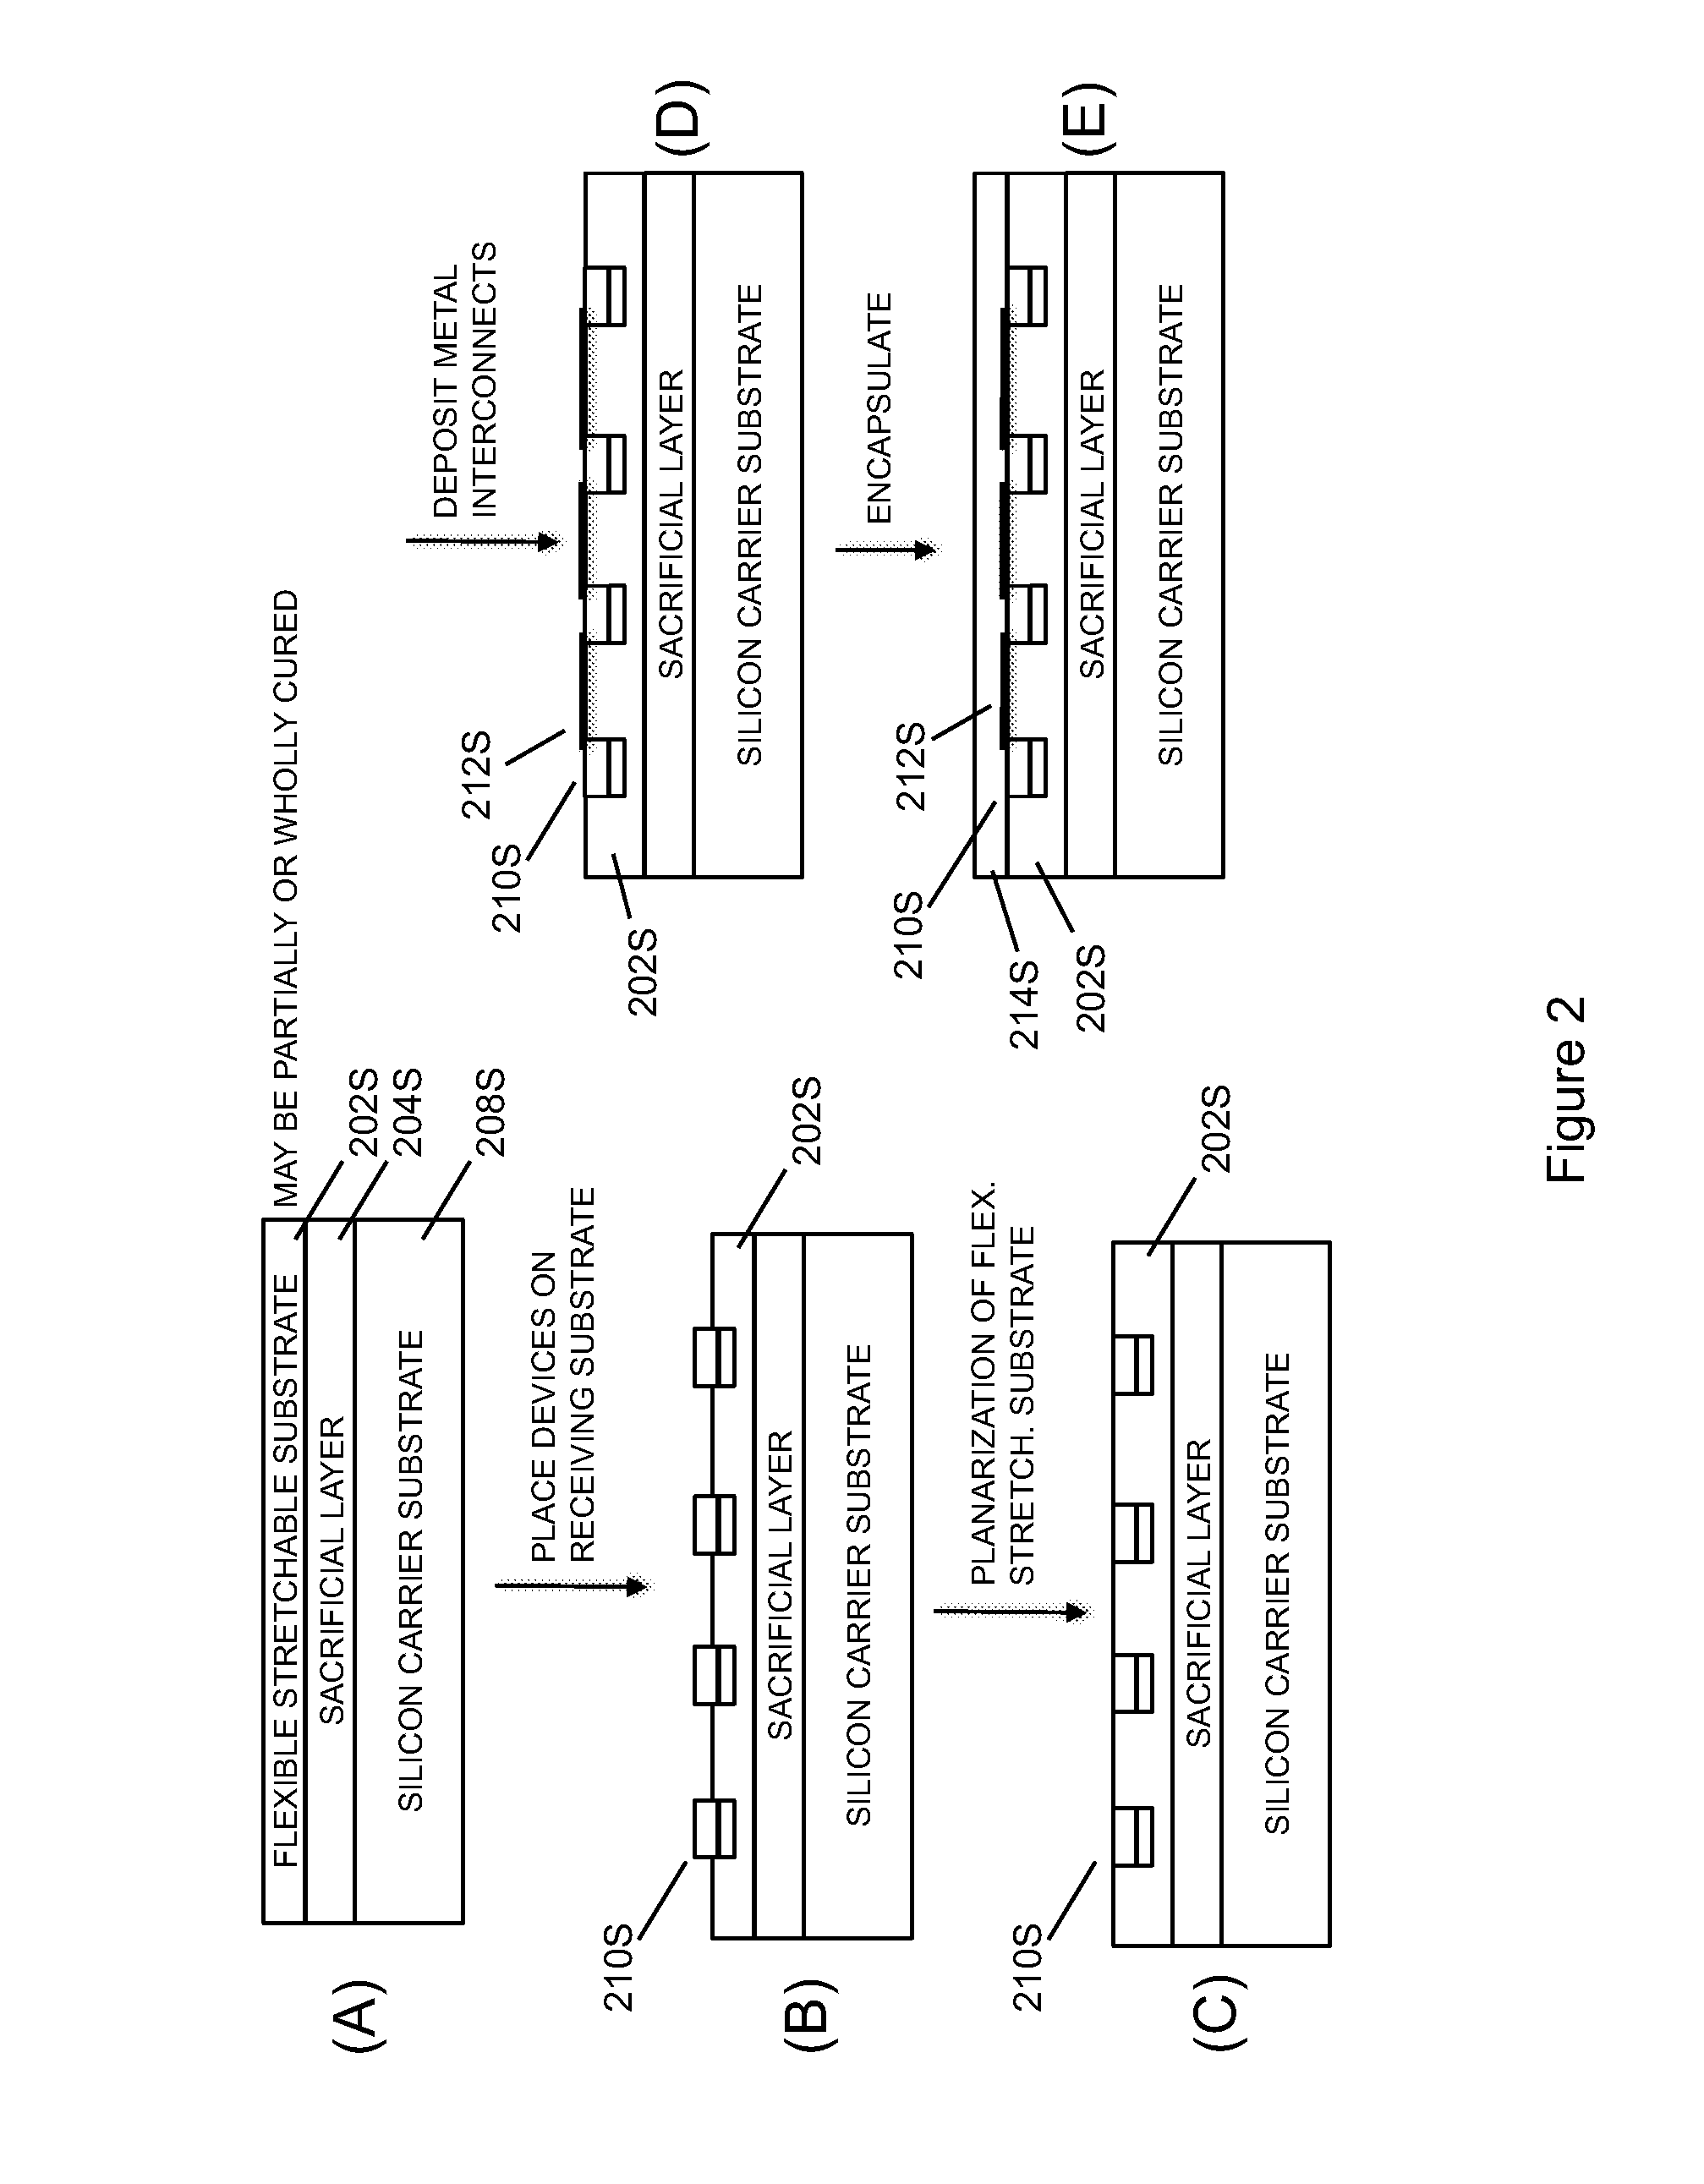 Systems, devices, and methods utilizing stretchable electronics to measure tire or road surface conditions